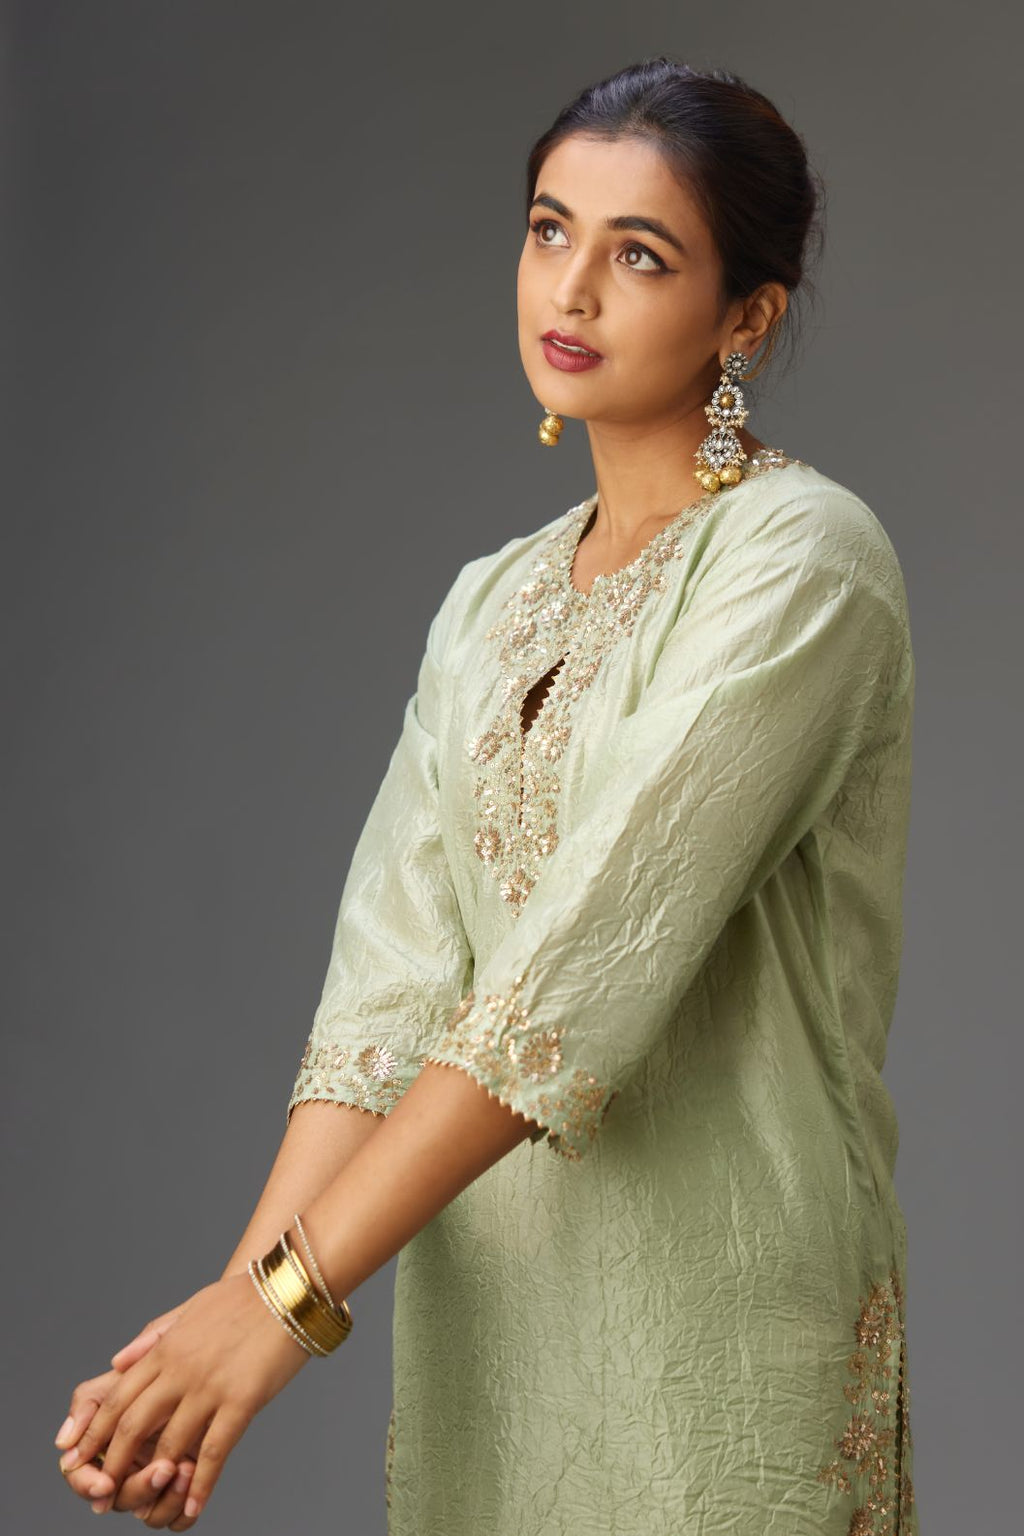 Green hand crushed silk straight kurta set highlighted with gold sequins and zari handwork.